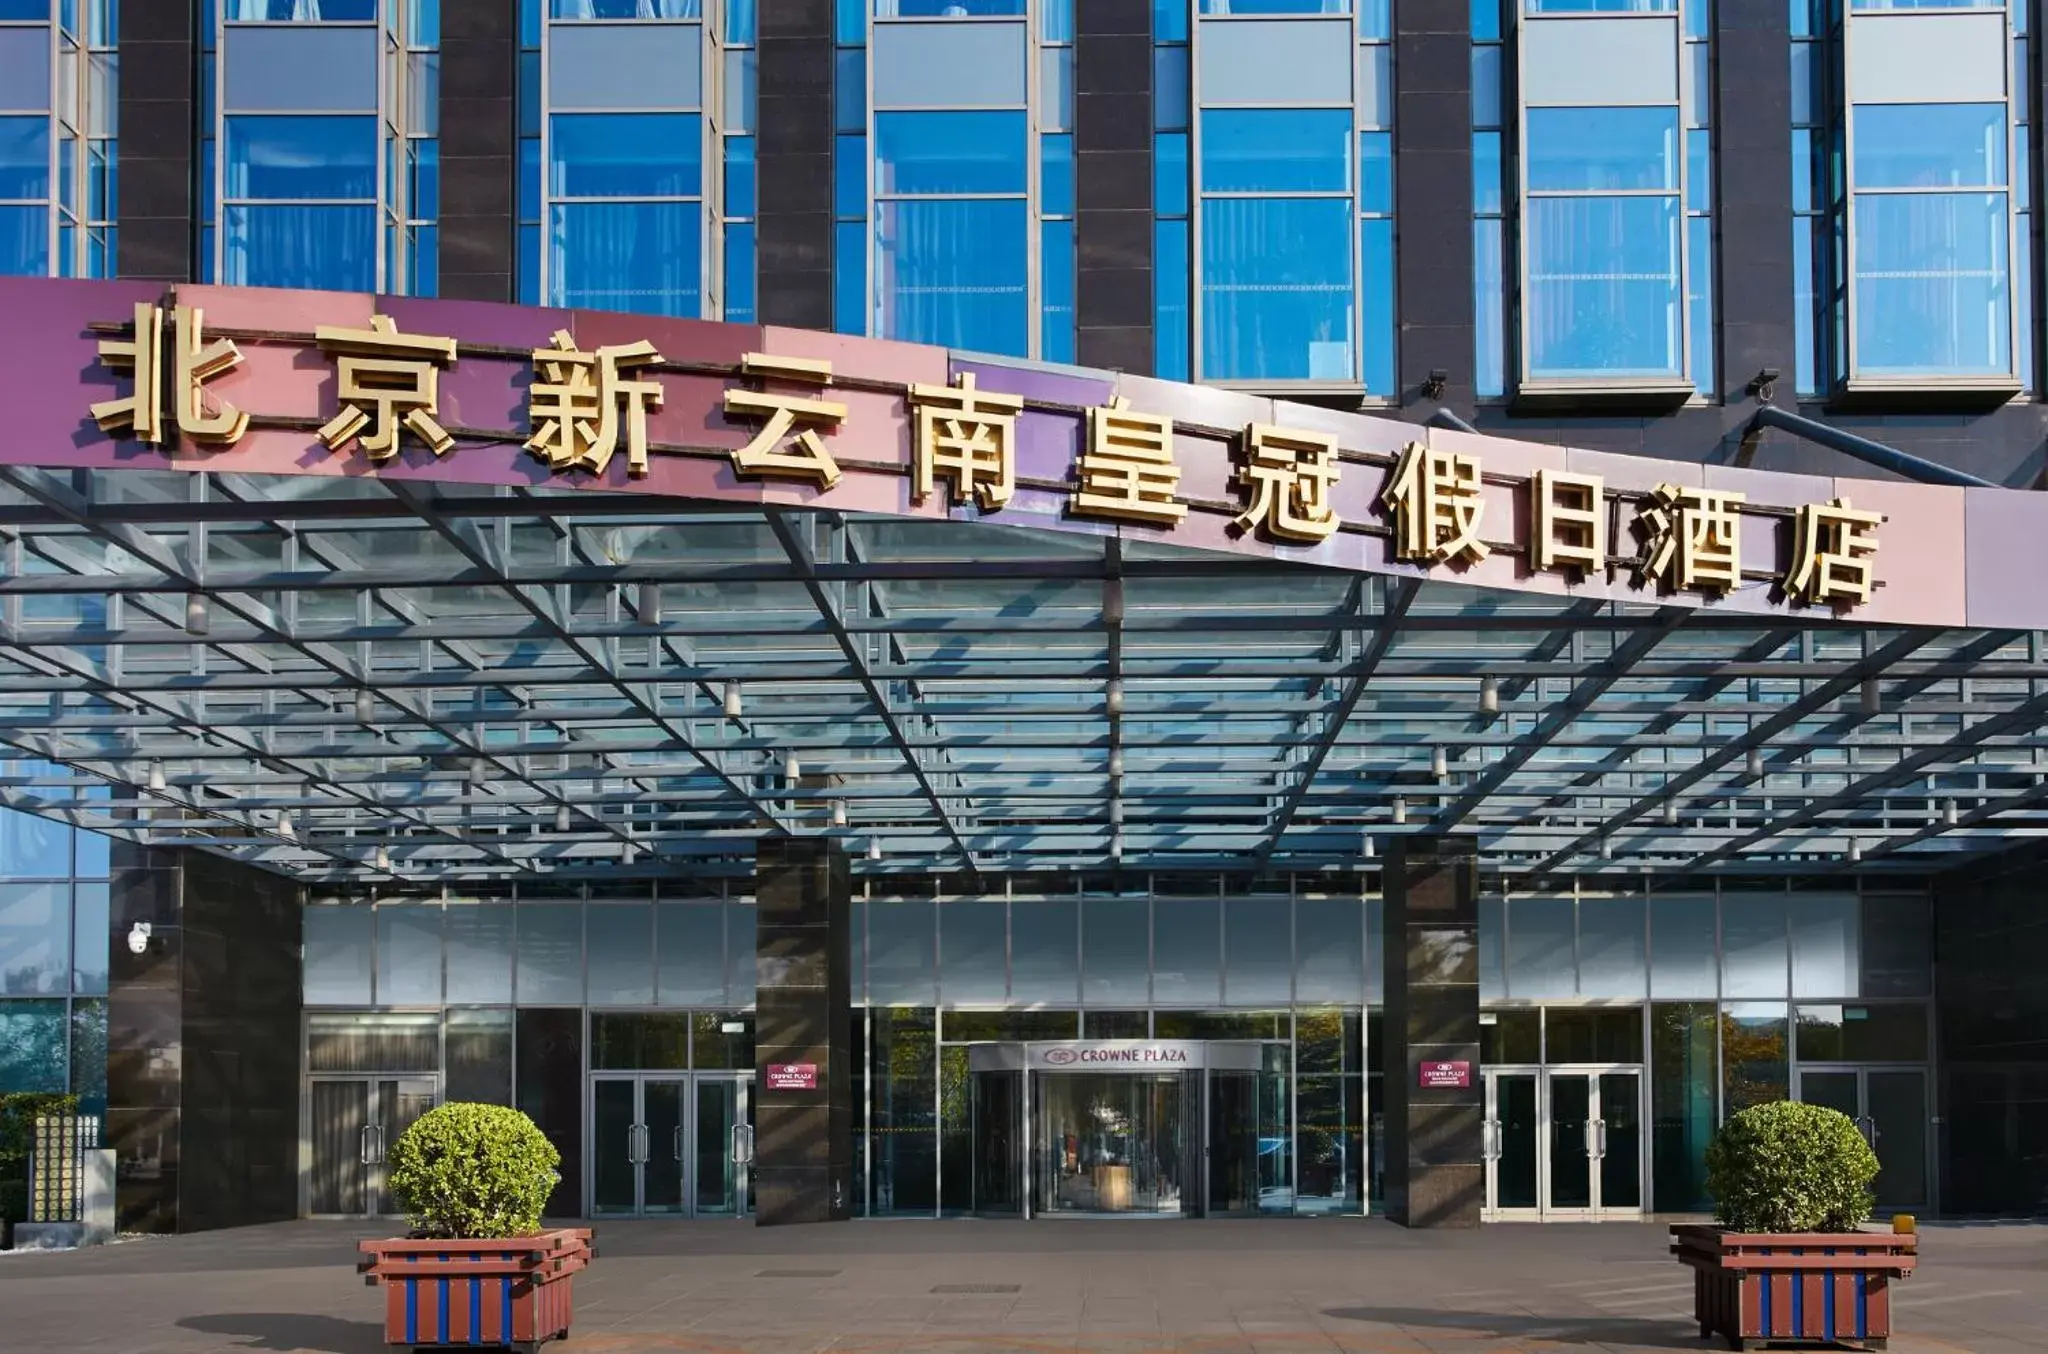 Property Building in Crowne Plaza Beijing Sun Palace, an IHG Hotel